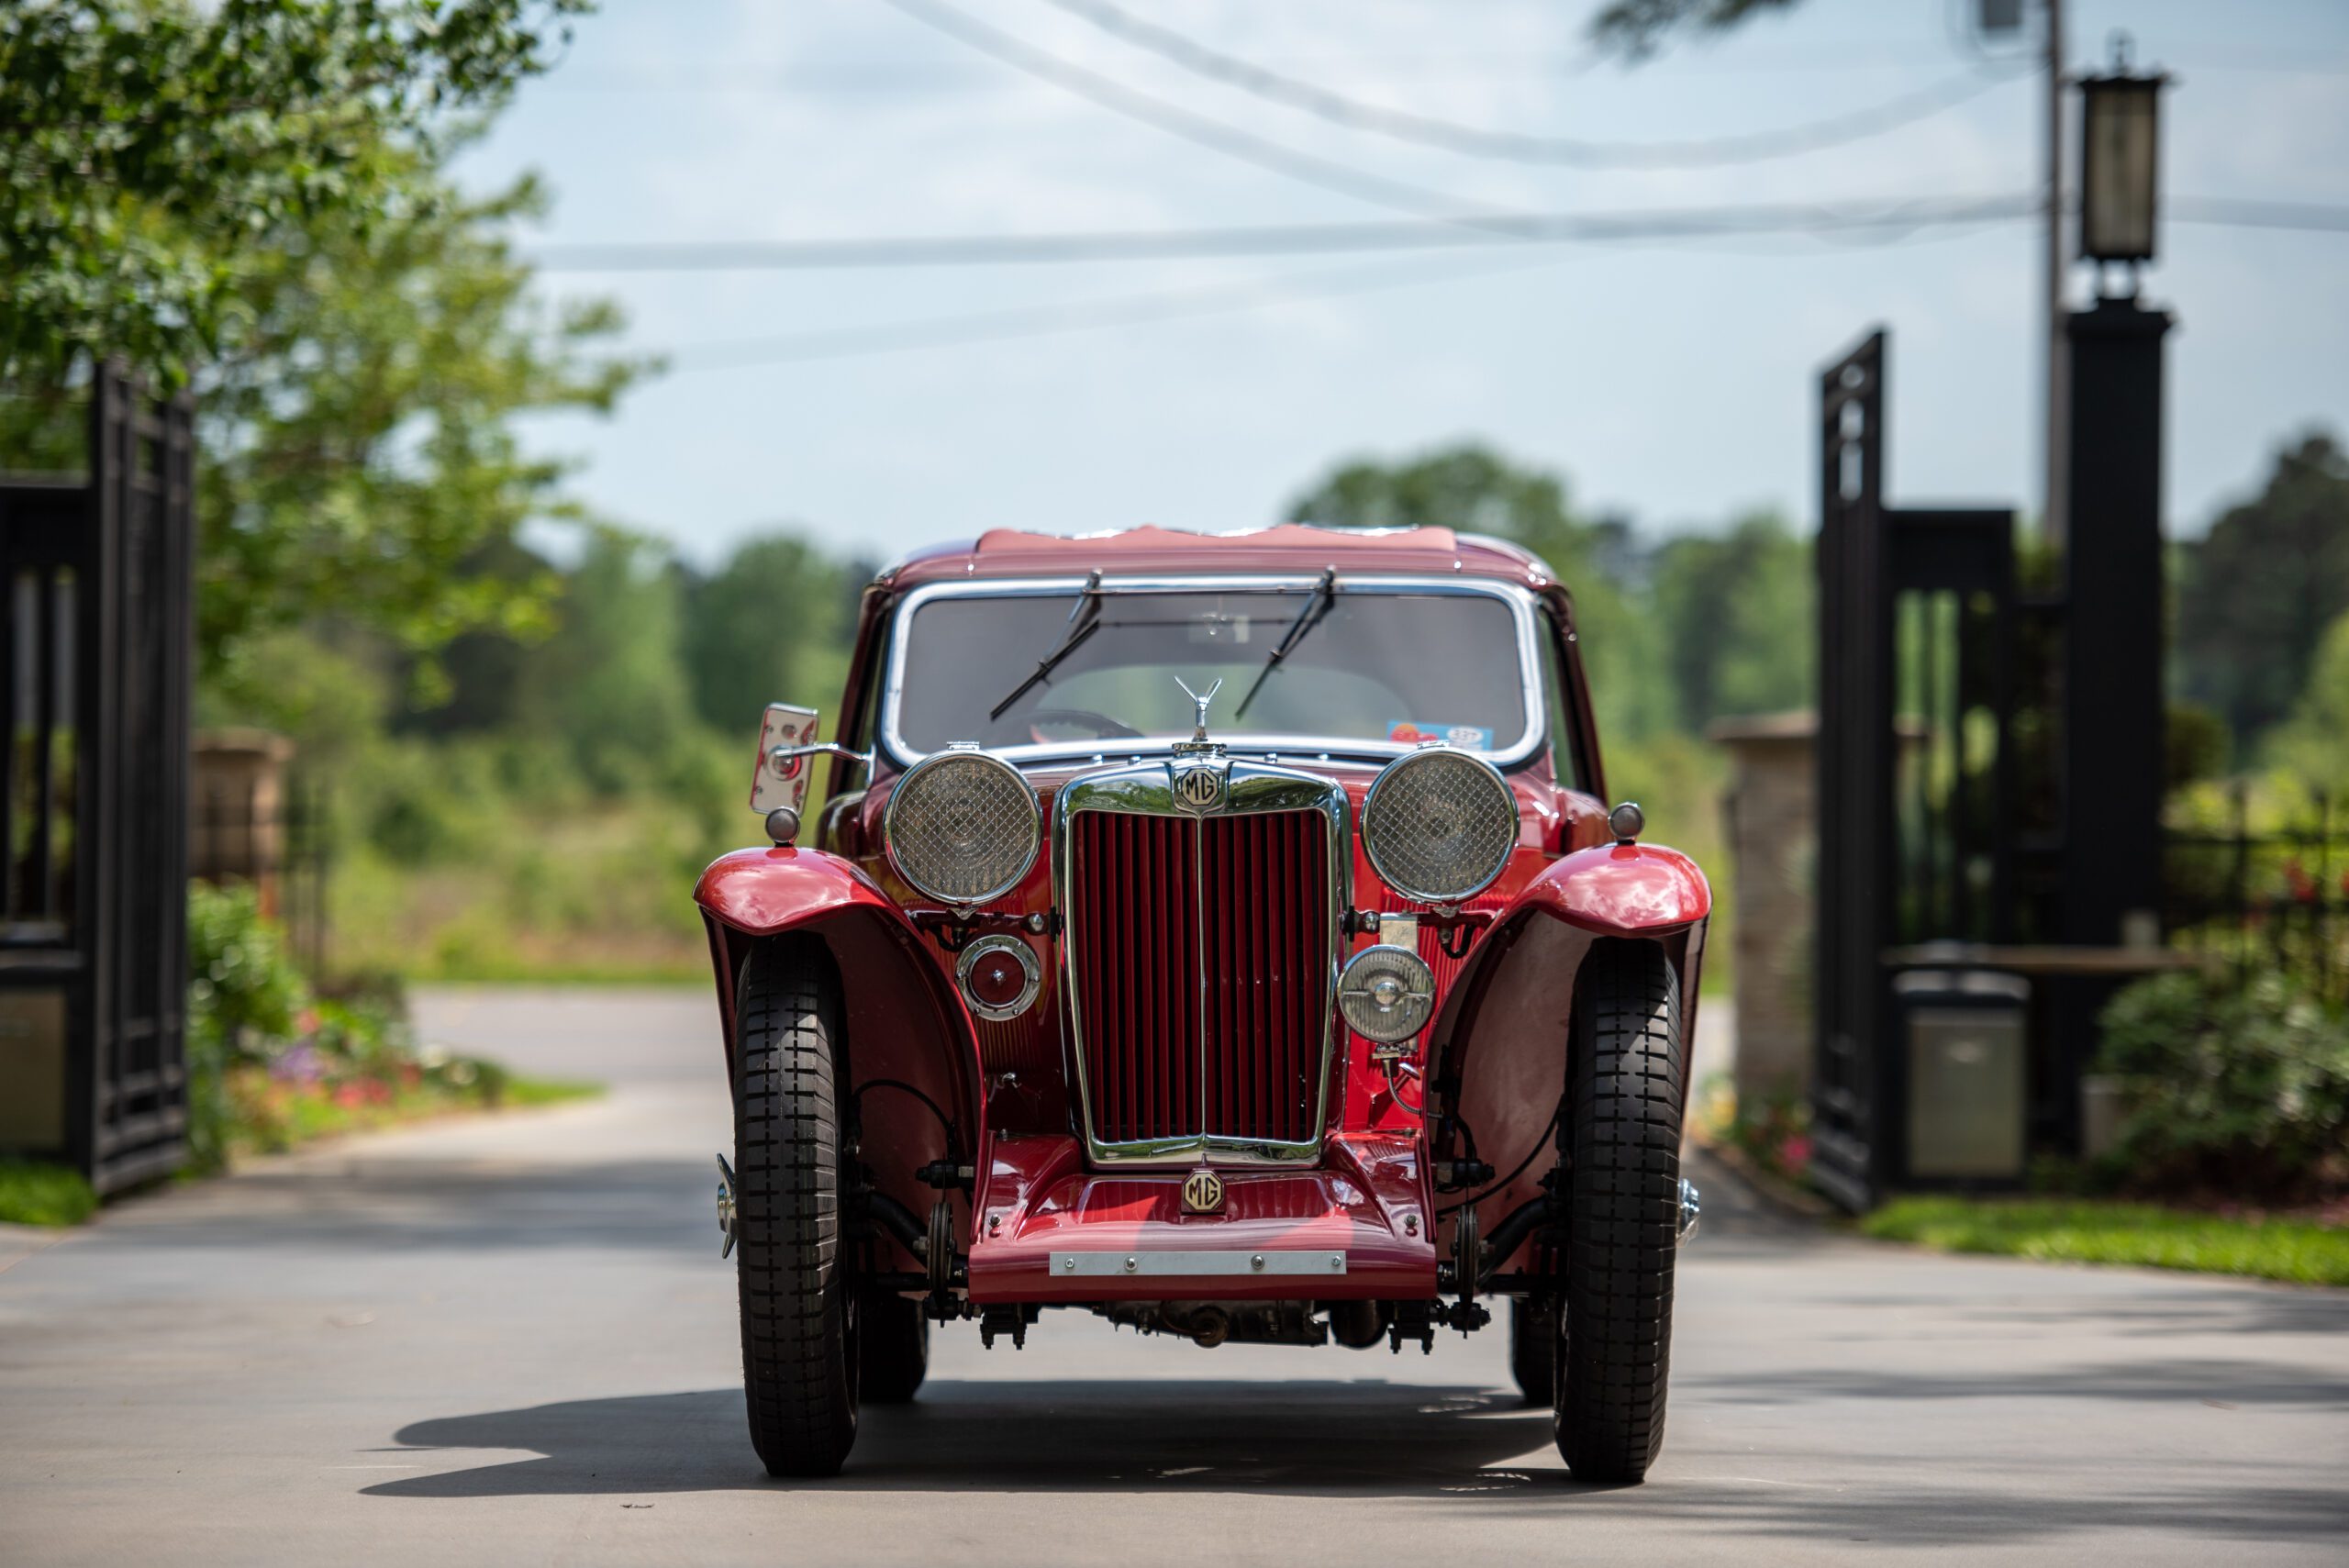 1935 MG PB Airline Coupe by Carbodies pNews